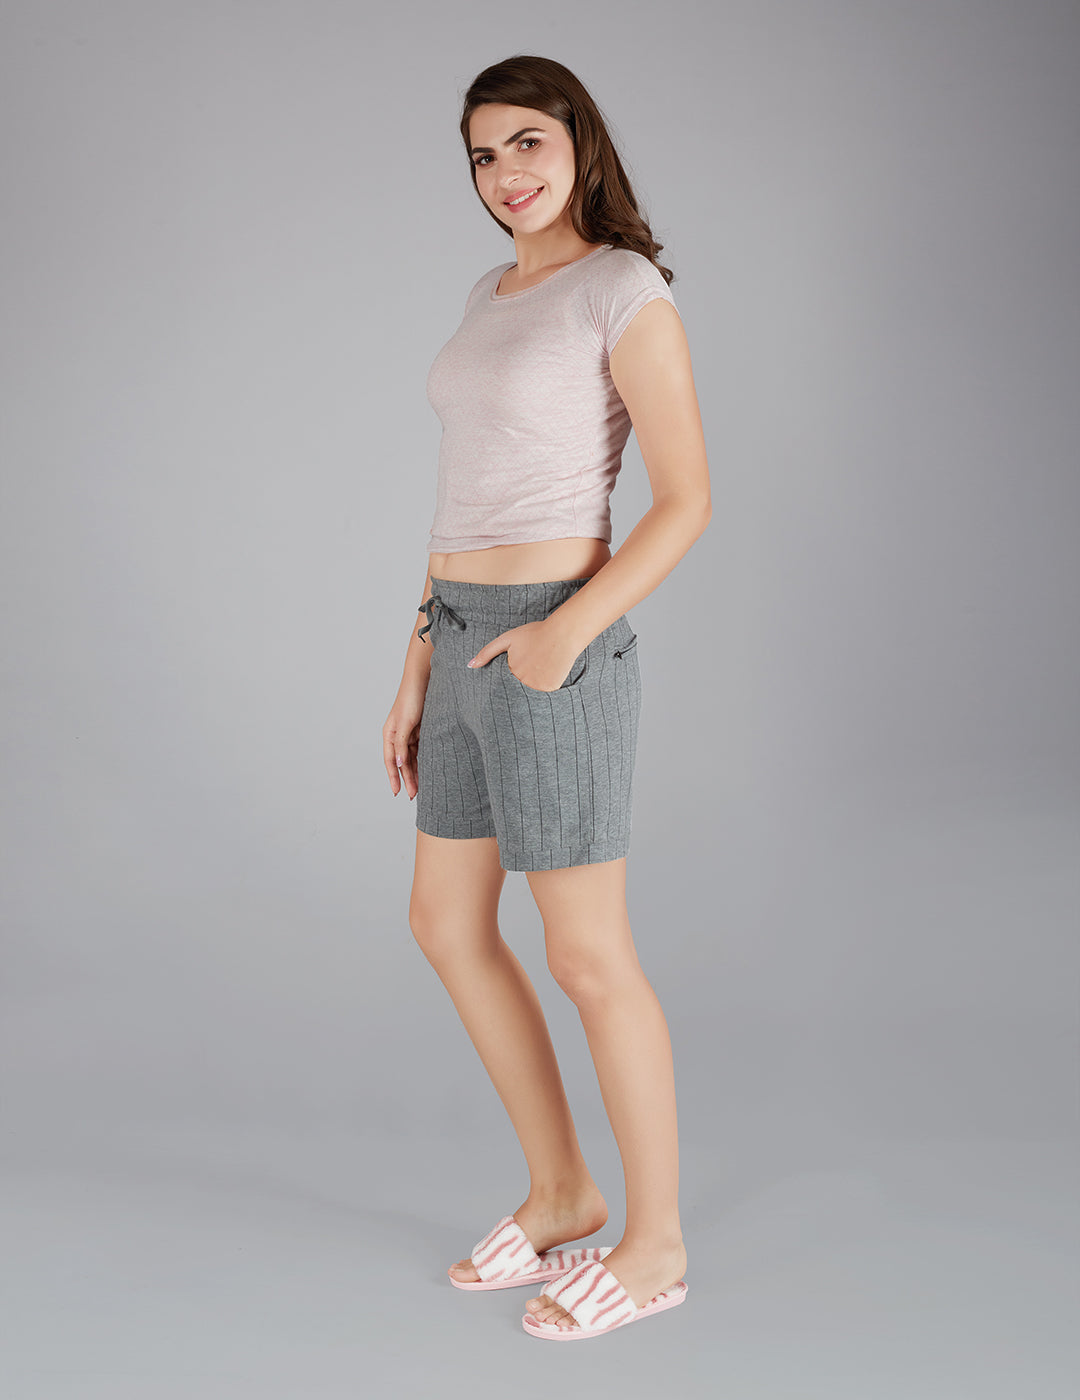 Printed Shorts For Women - Cotton Lounge Shorts - Grey